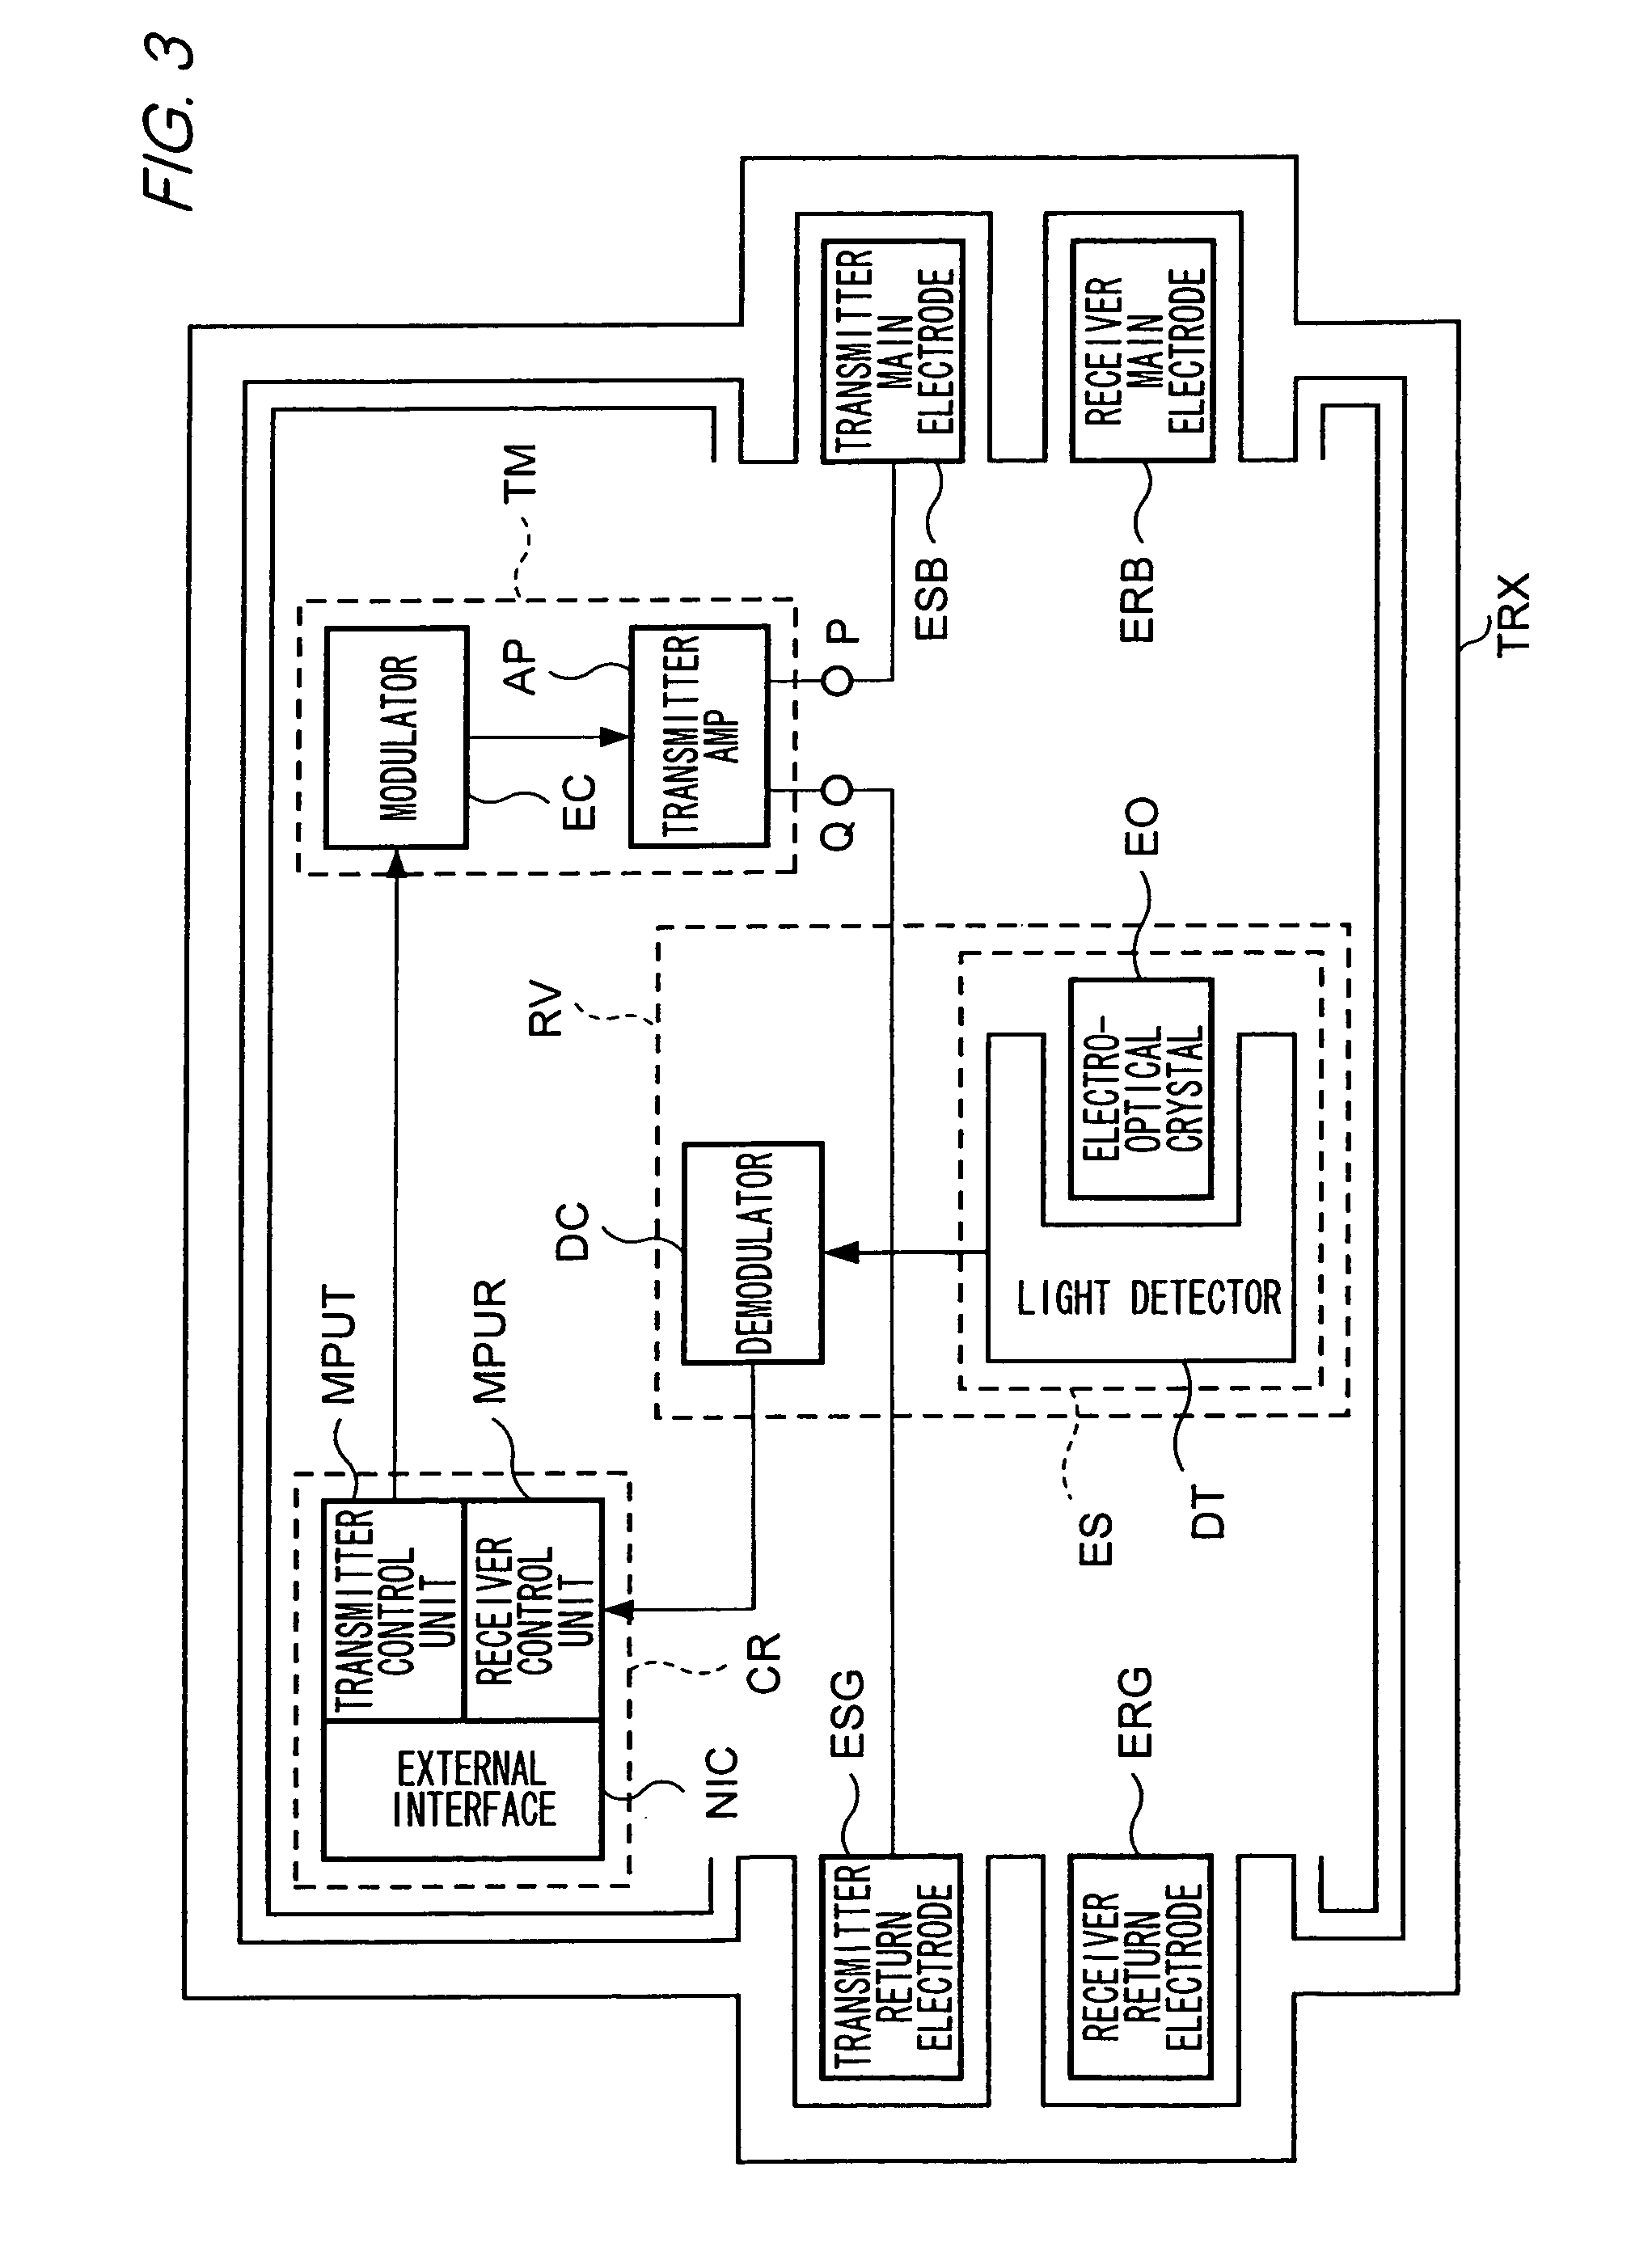 Electronic communications system, apparatus and electrode layout method